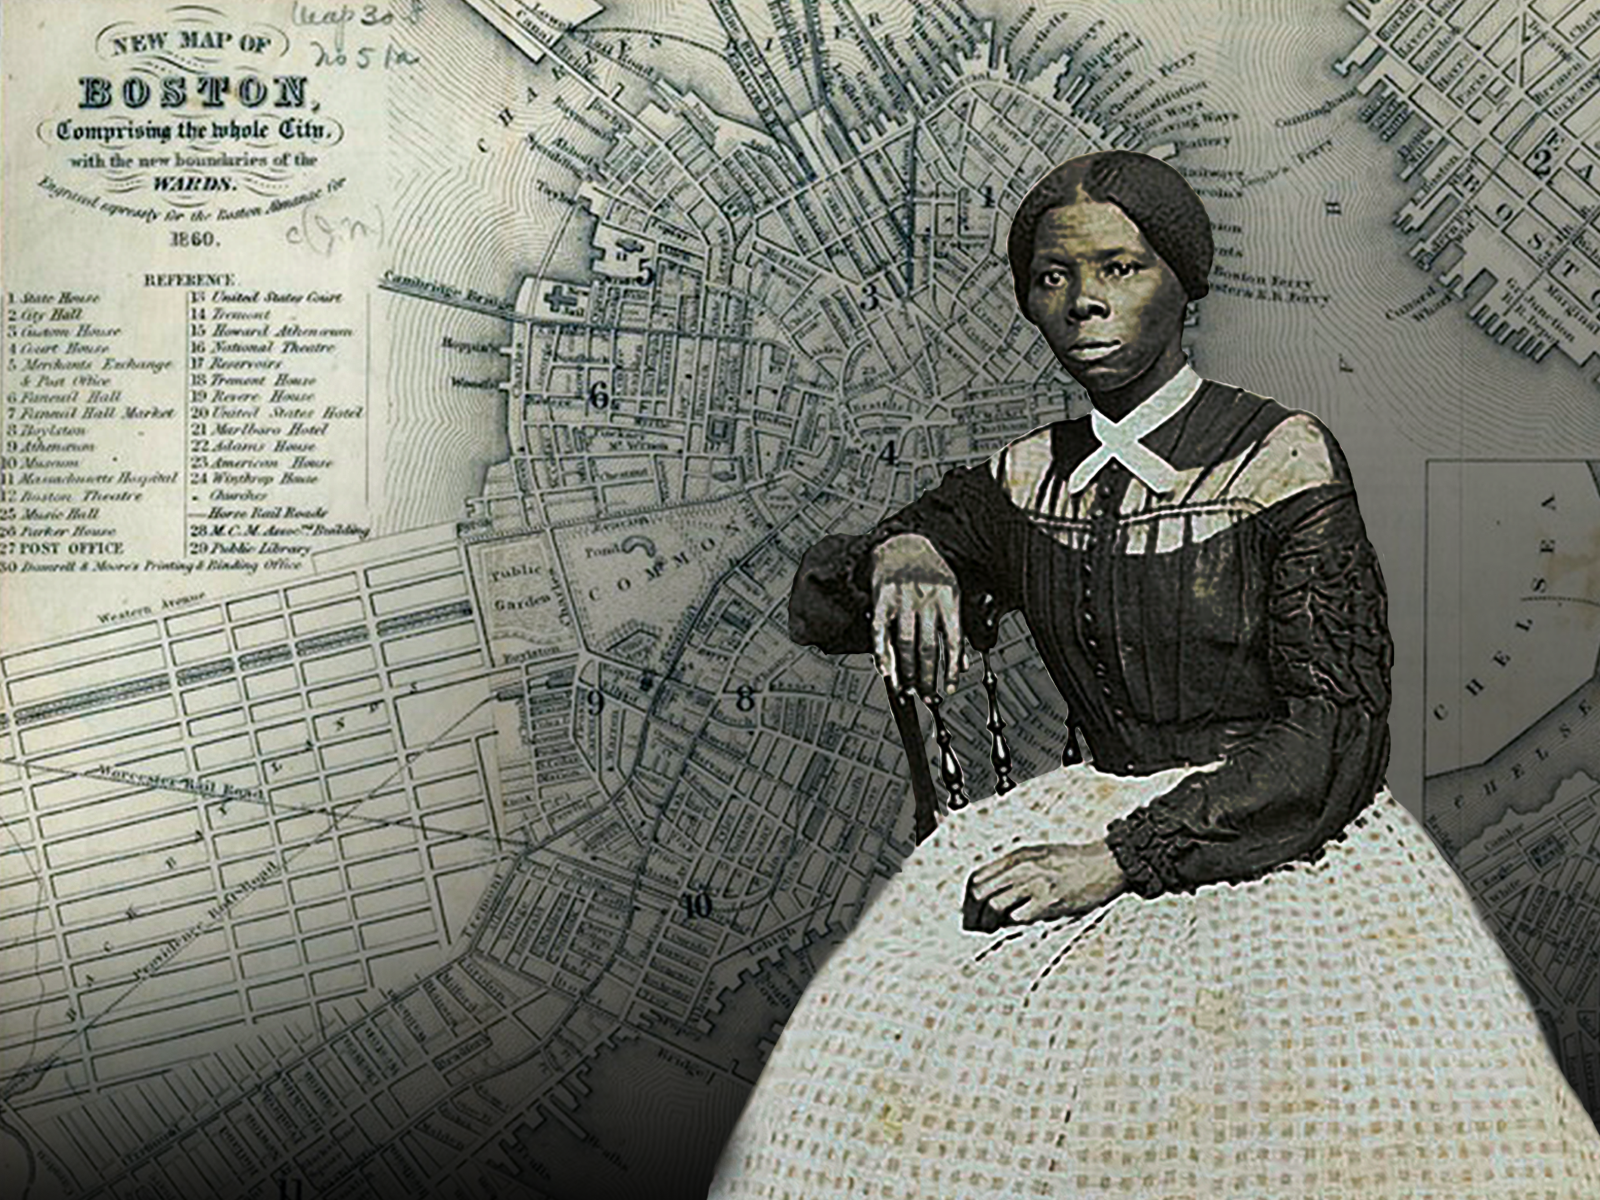 Harriet Tubman portrait over a map of Boston.